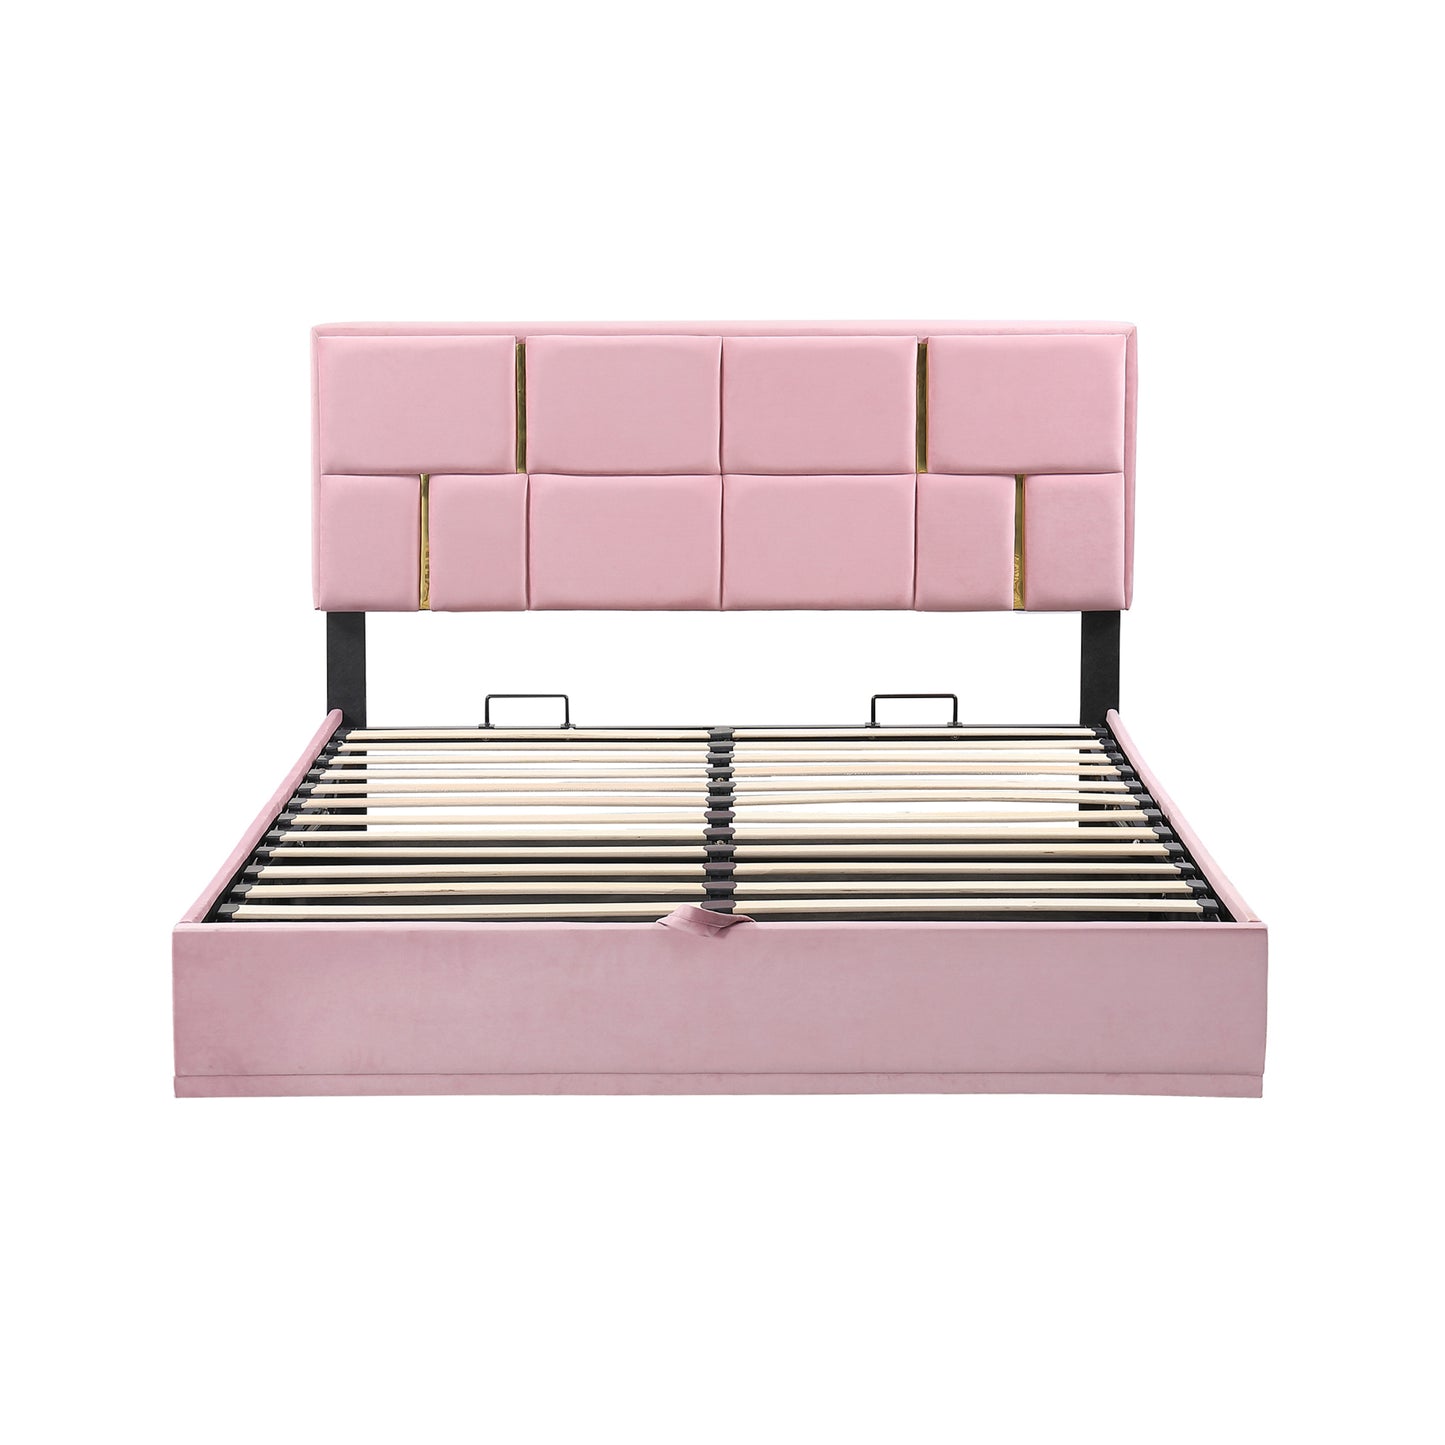 Queen Size Upholstered Platform Bed with Hydraulic Storage System,No Box Spring Needed,Pink